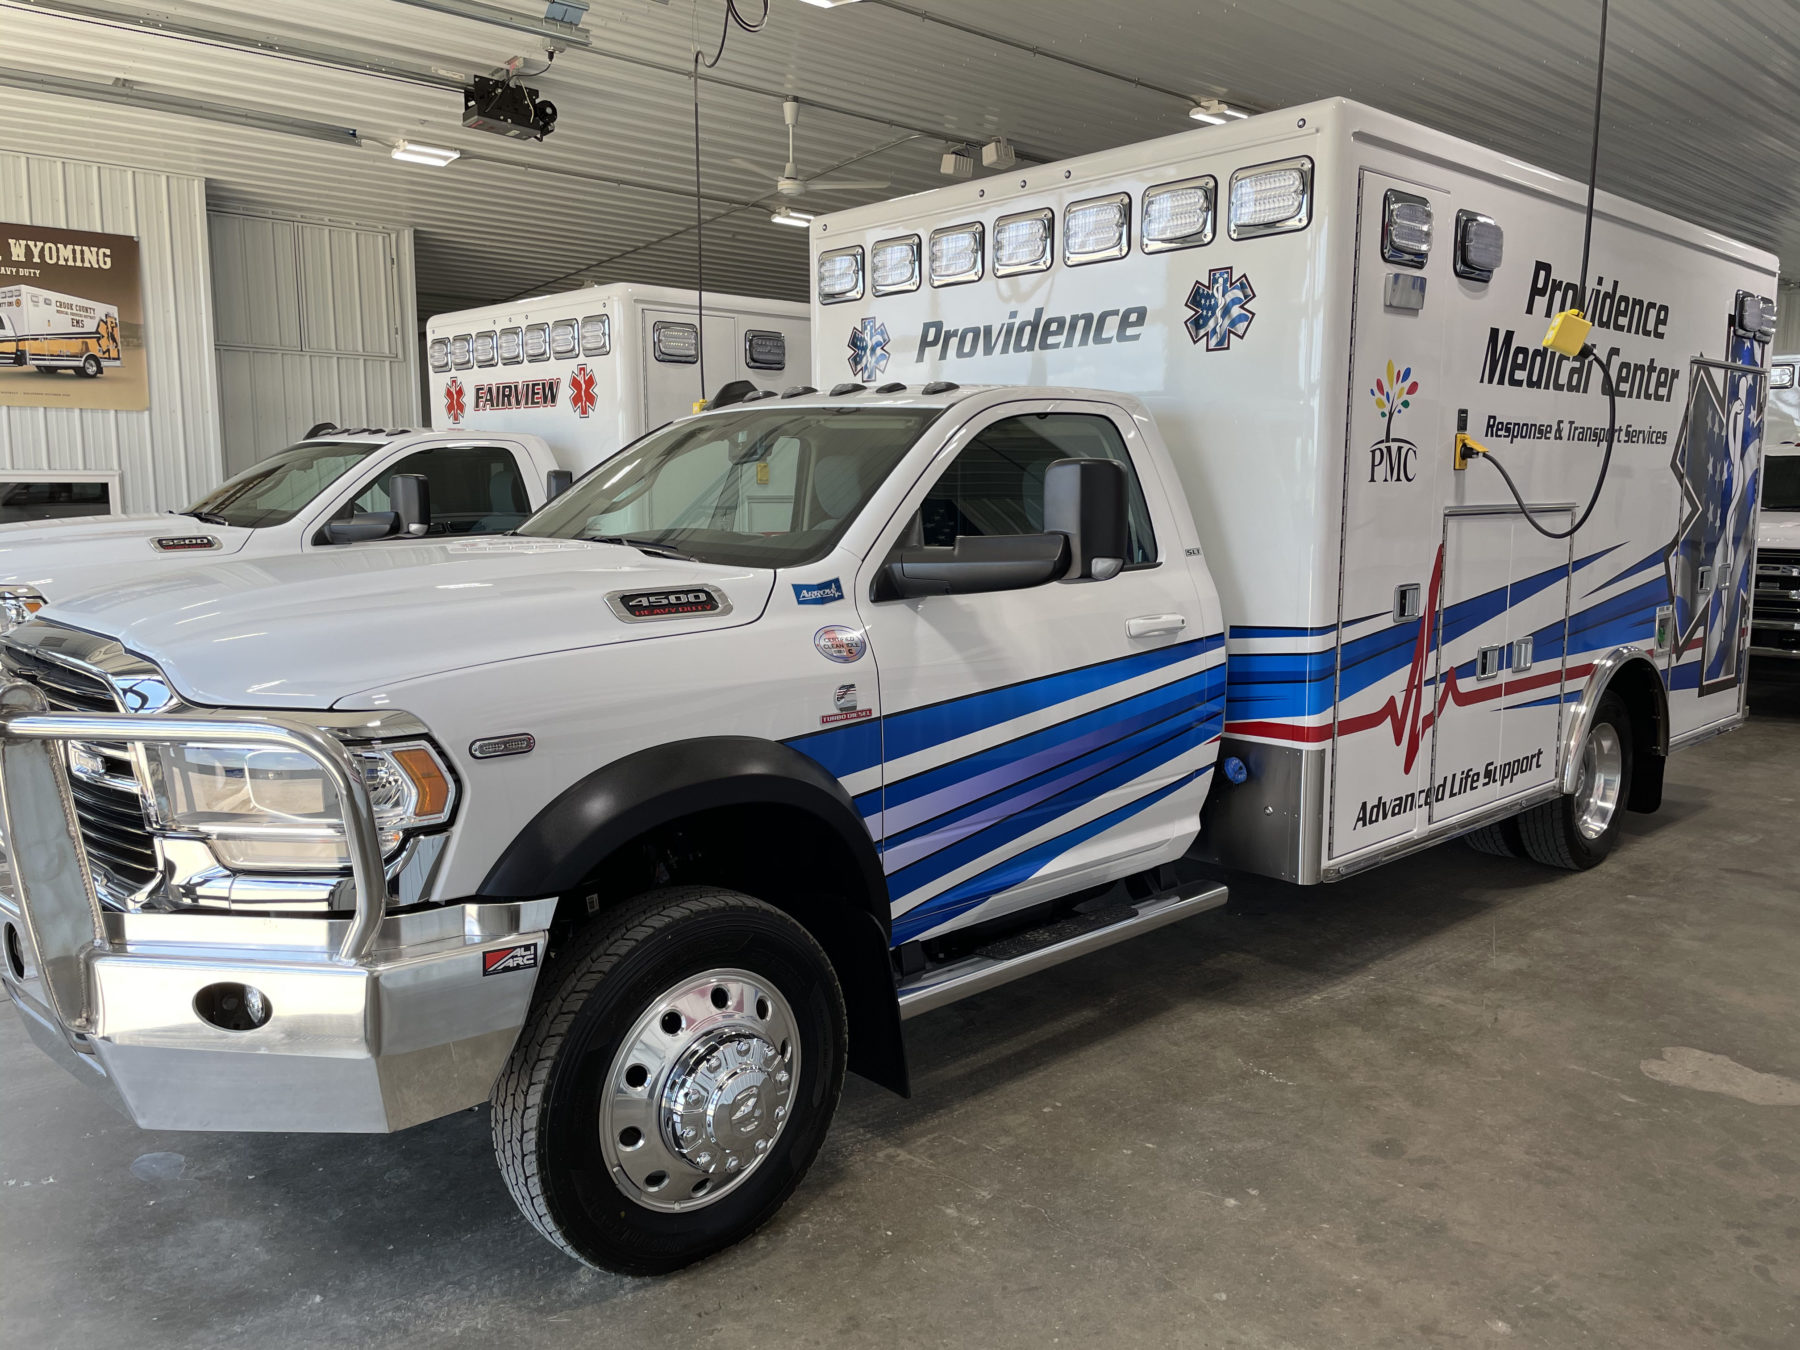 2020 Ram 4500 4x4 Heavy Duty Ambulance For Sale – Picture 3